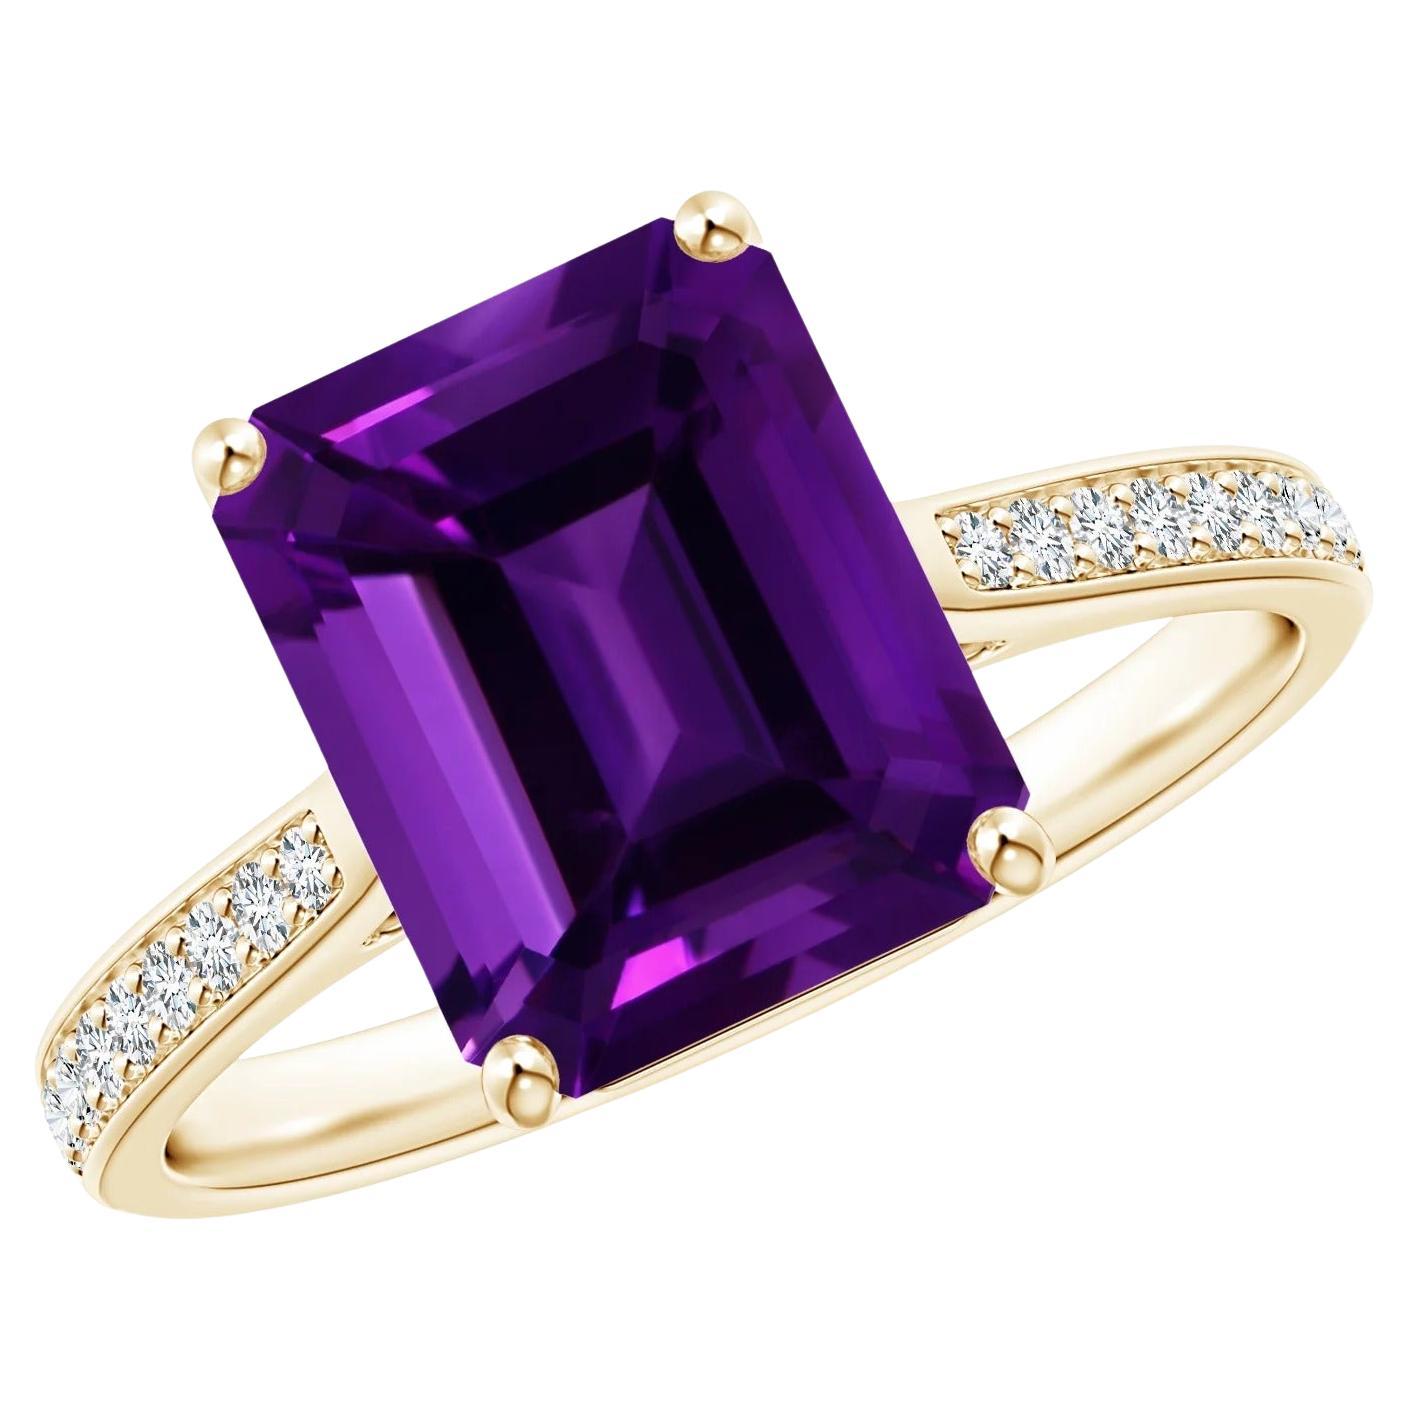 For Sale:  GIA Certified Natural Amethyst Cocktail Ring in Yellow Gold with Diamonds